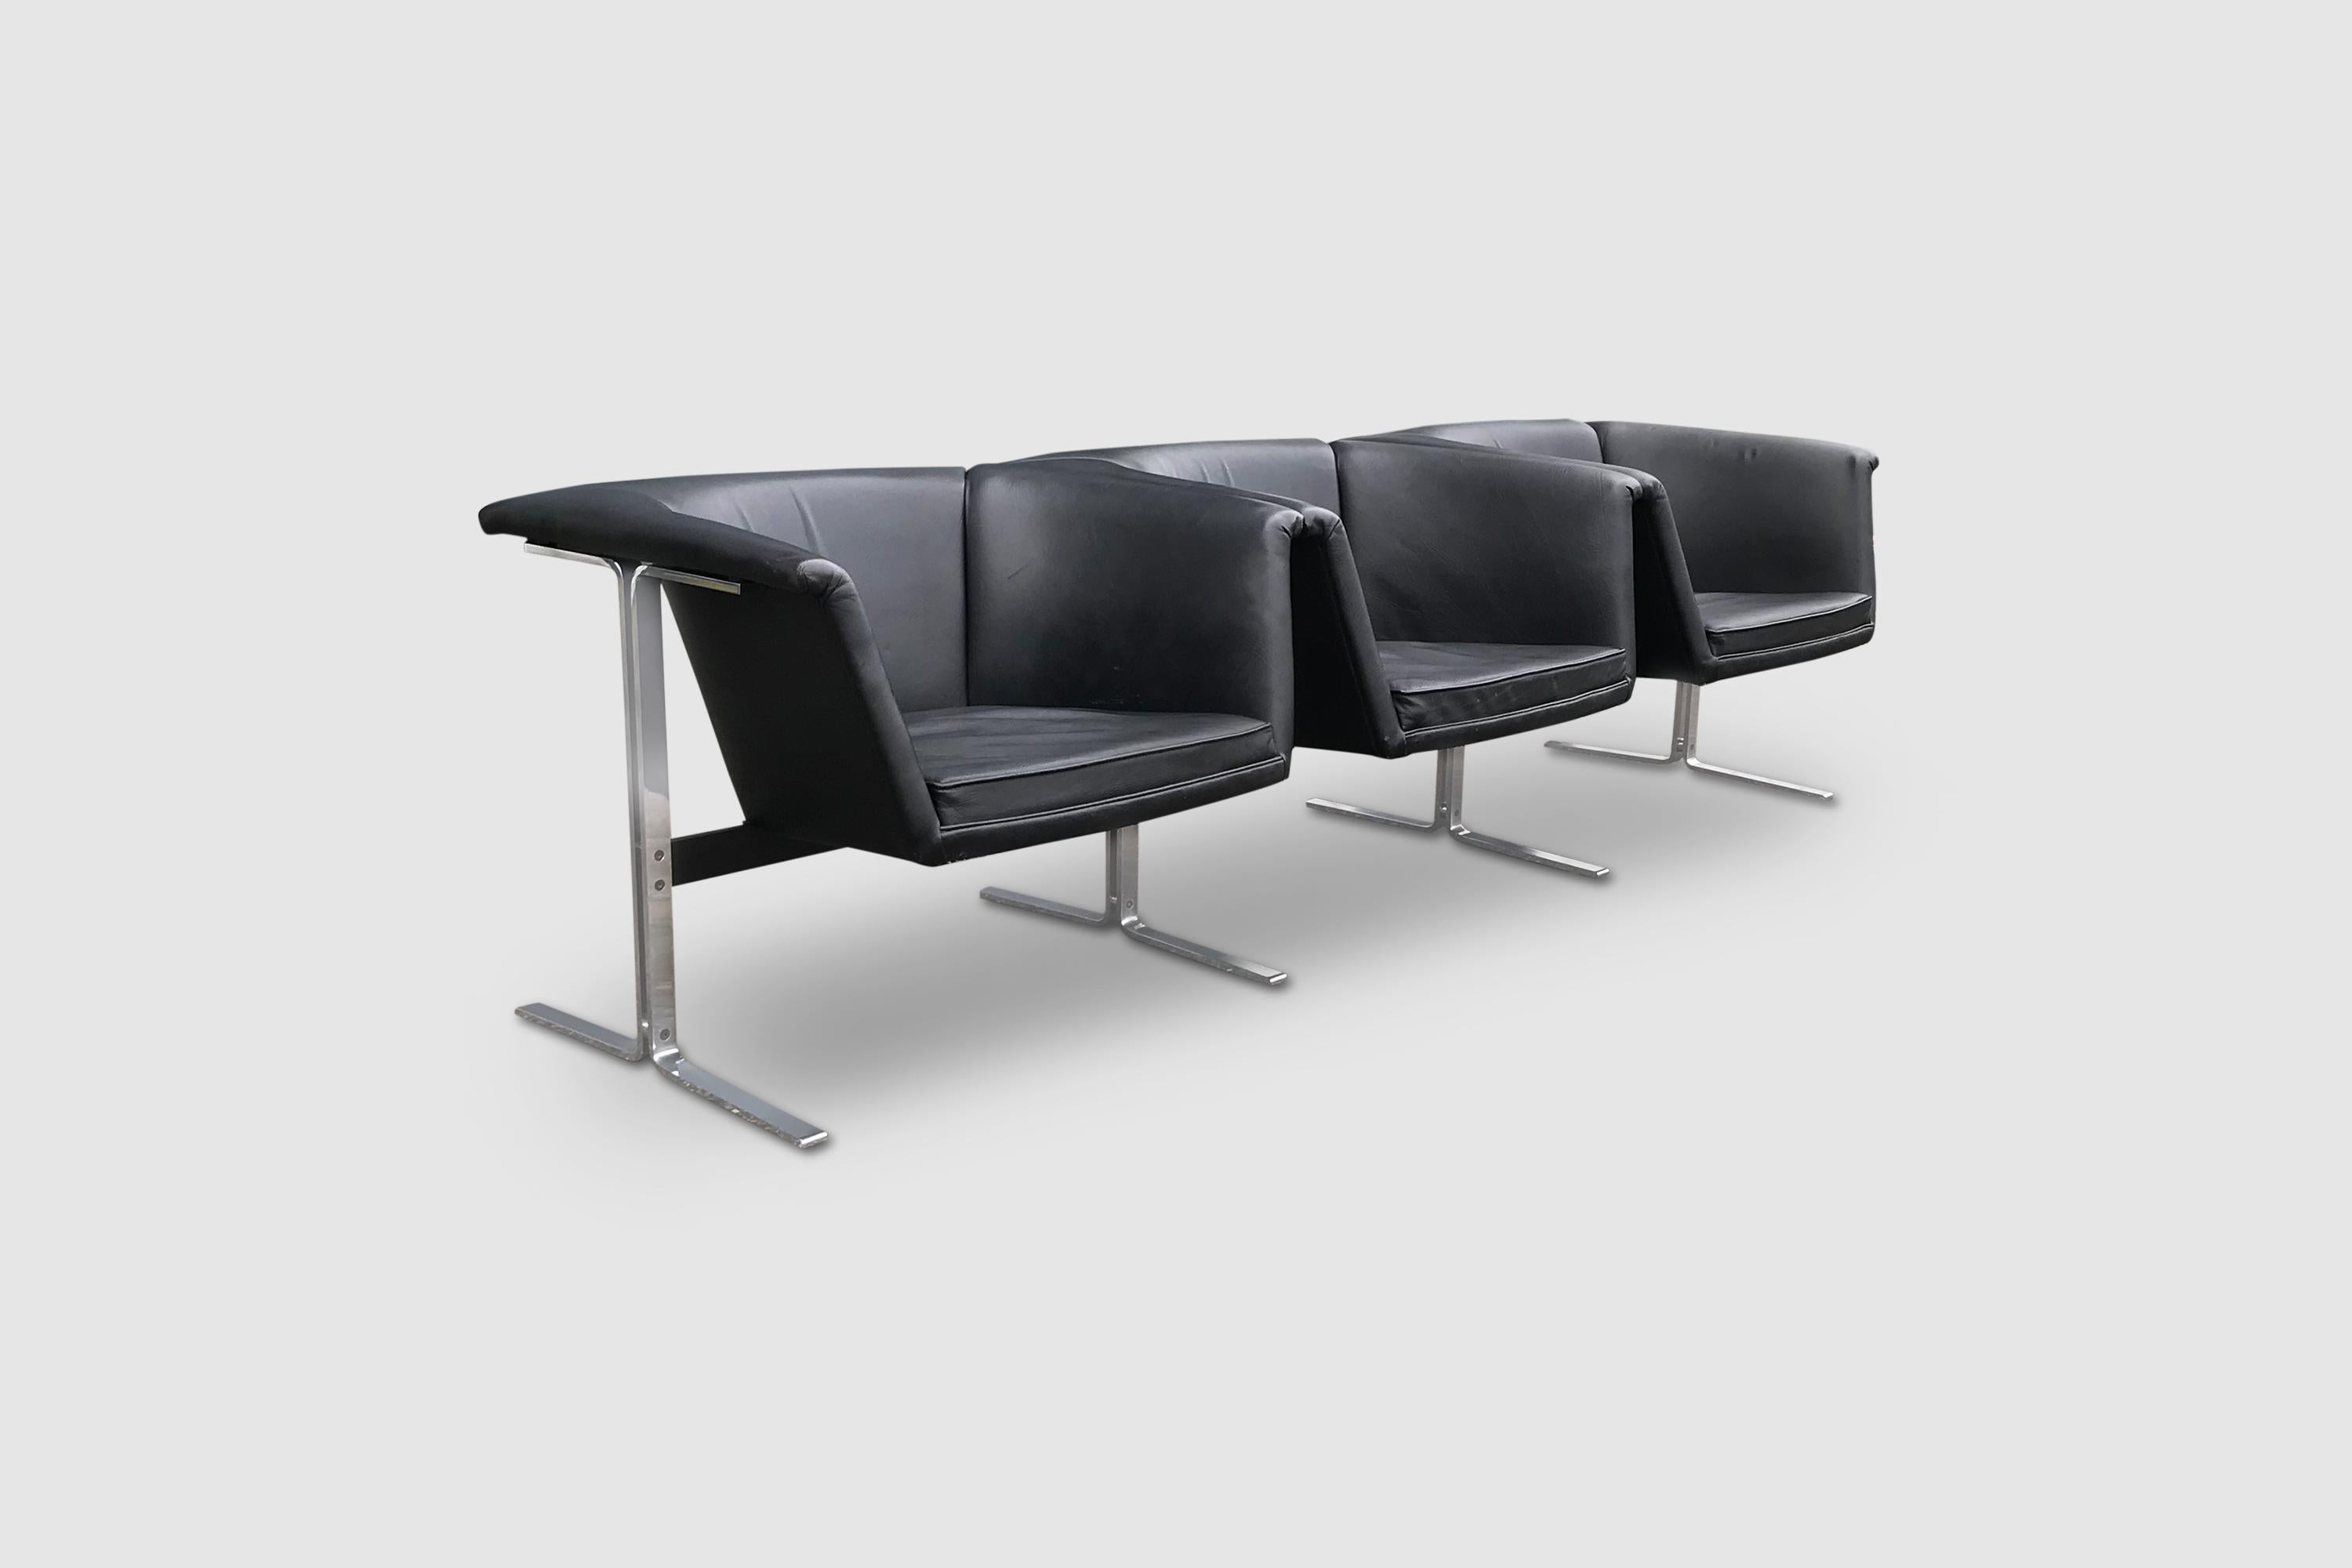 A rare design by Geoffrey Harcourt, a 3-seater 042 seating group by Geoffrey Harcourt in full black leather.

Originally introduced as model 630, the model has come to be known later on as 042.

The floating forward leaning seats on a sleek